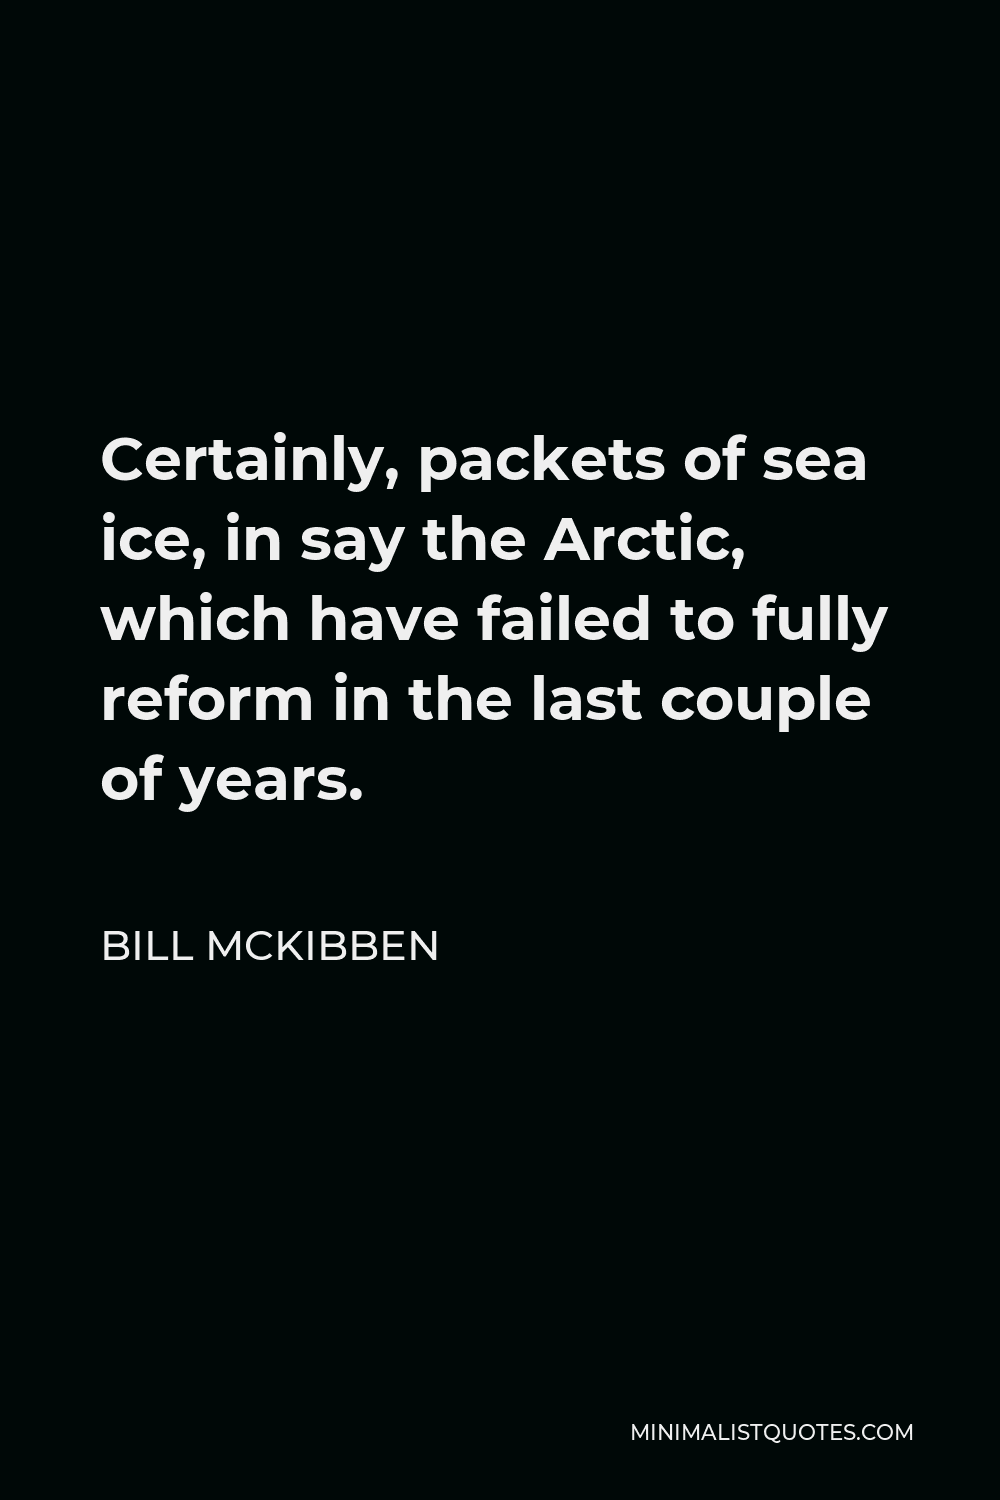 Bill McKibben Quote - Certainly, packets of sea ice, in say the Arctic, which have failed to fully reform in the last couple of years.